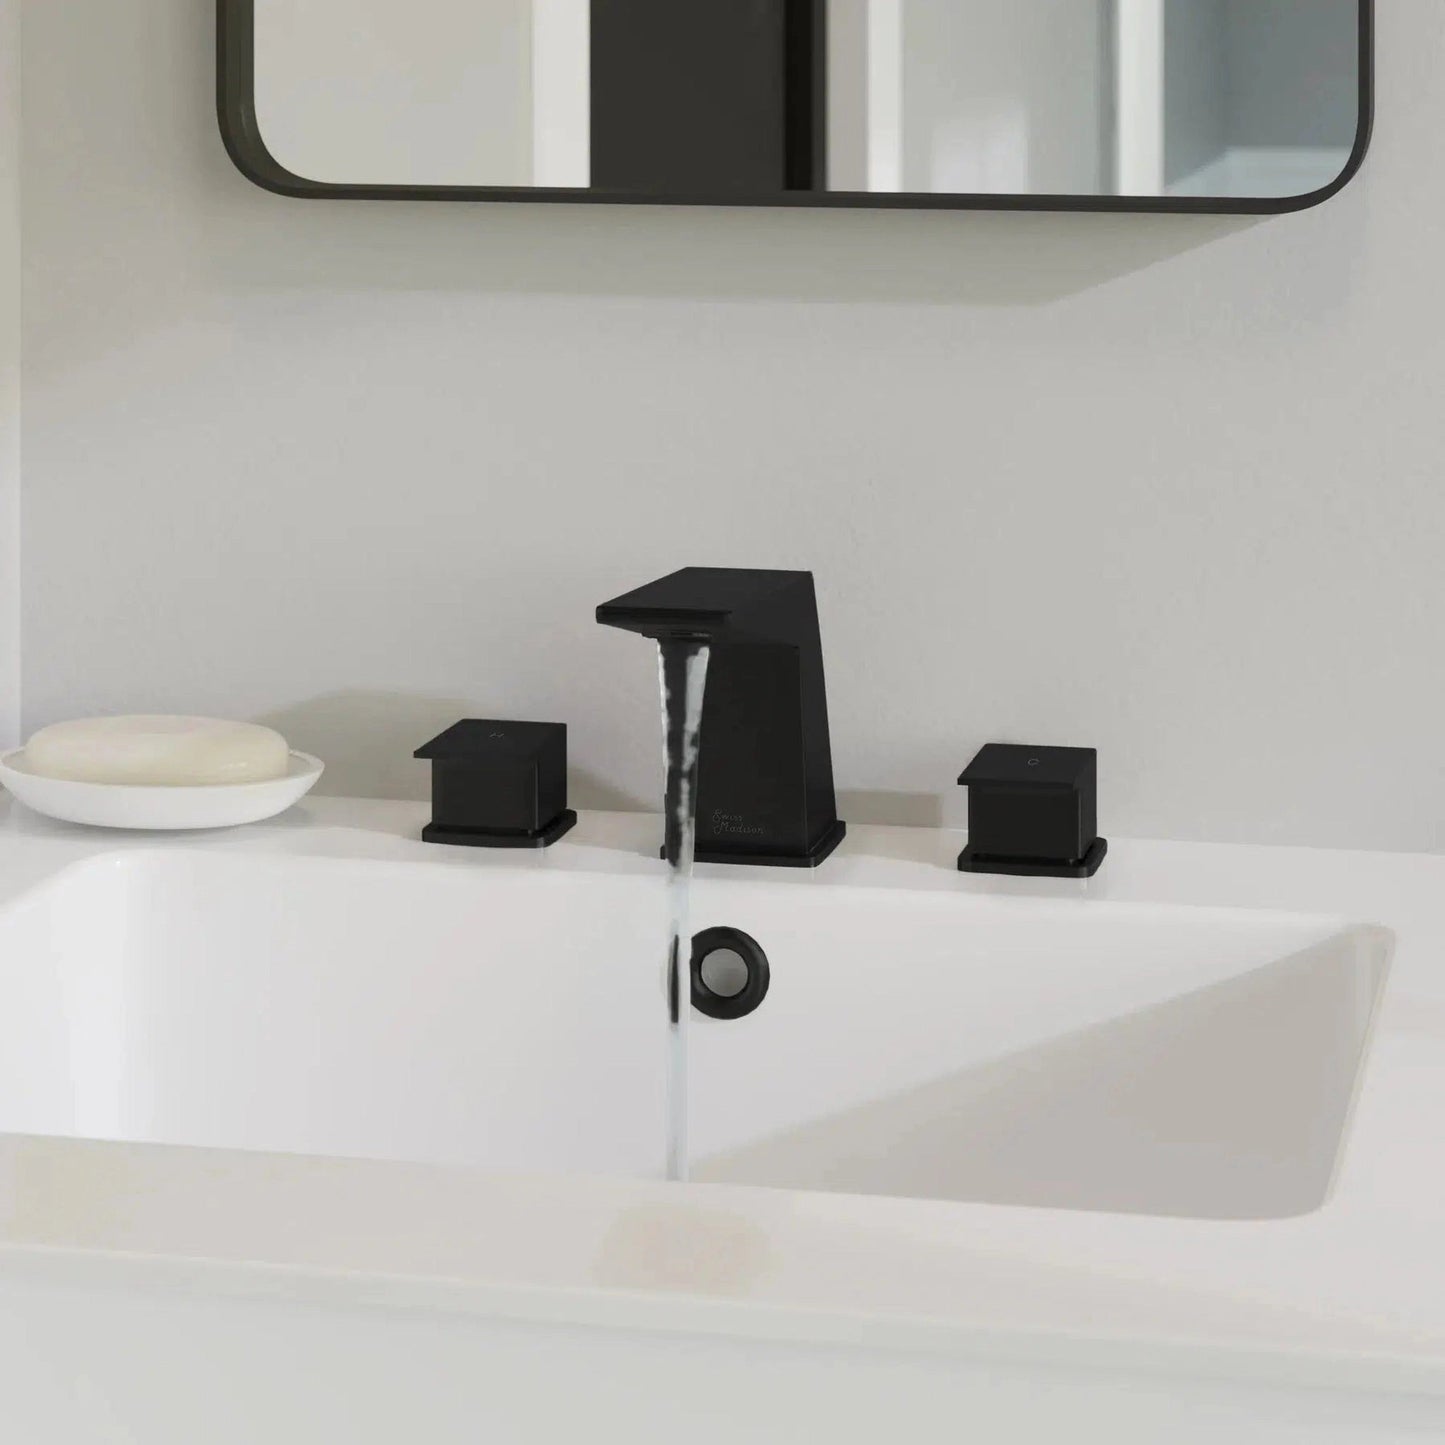 Swiss Madison Carré 8" Matte Black Widespread Bathroom Faucet With Knob Handles and 1.2 GPM Flow Rate